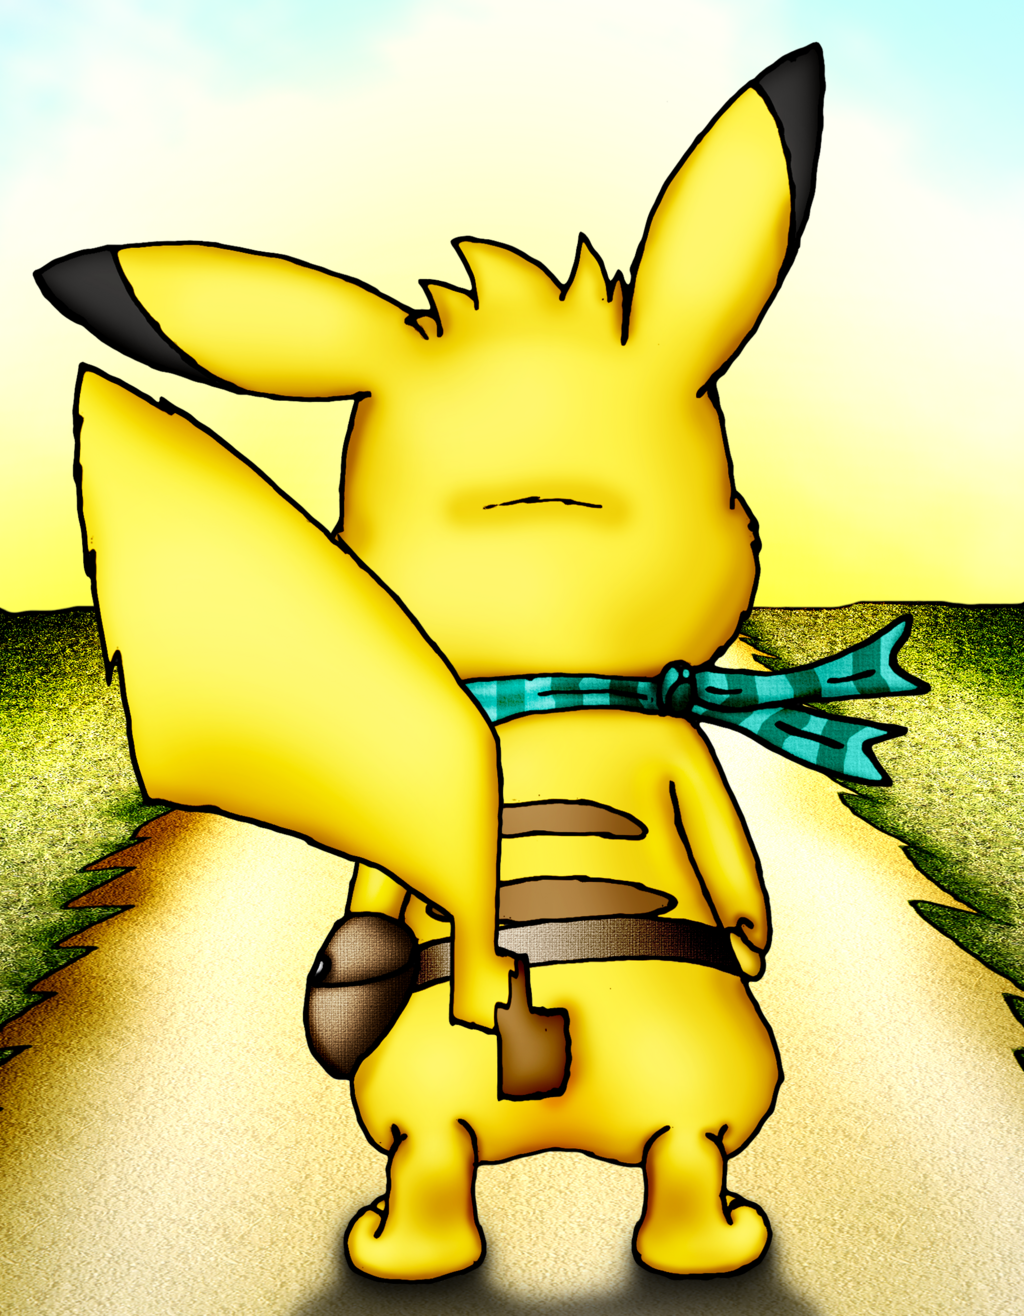 Andy the Pikachu Looking to the Horizon (Commission)